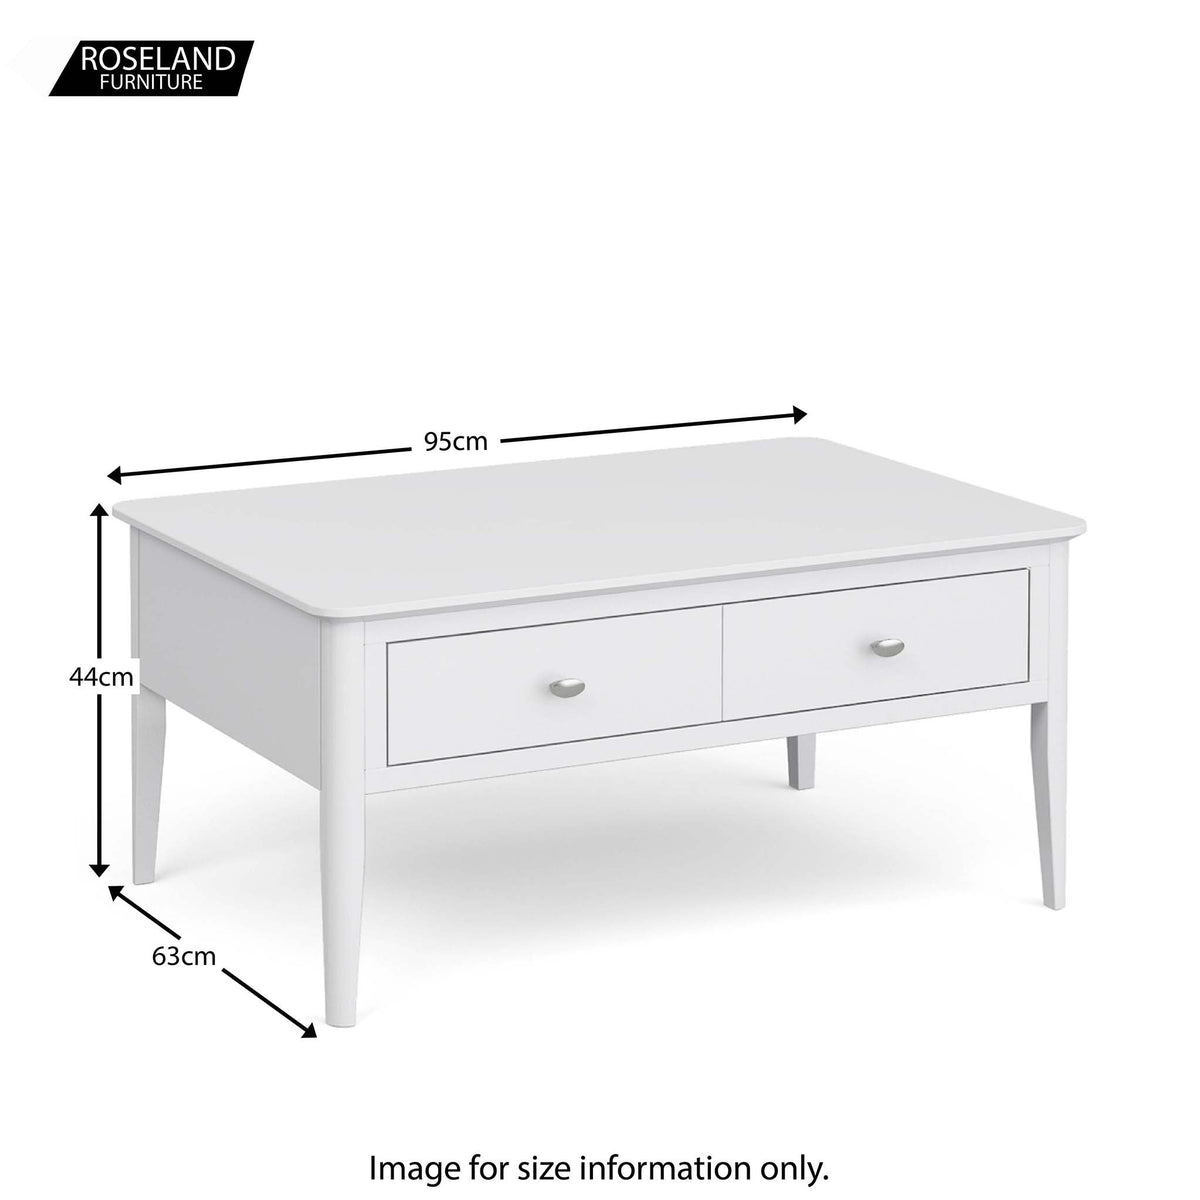 Chester White Coffee Table - Size Guide